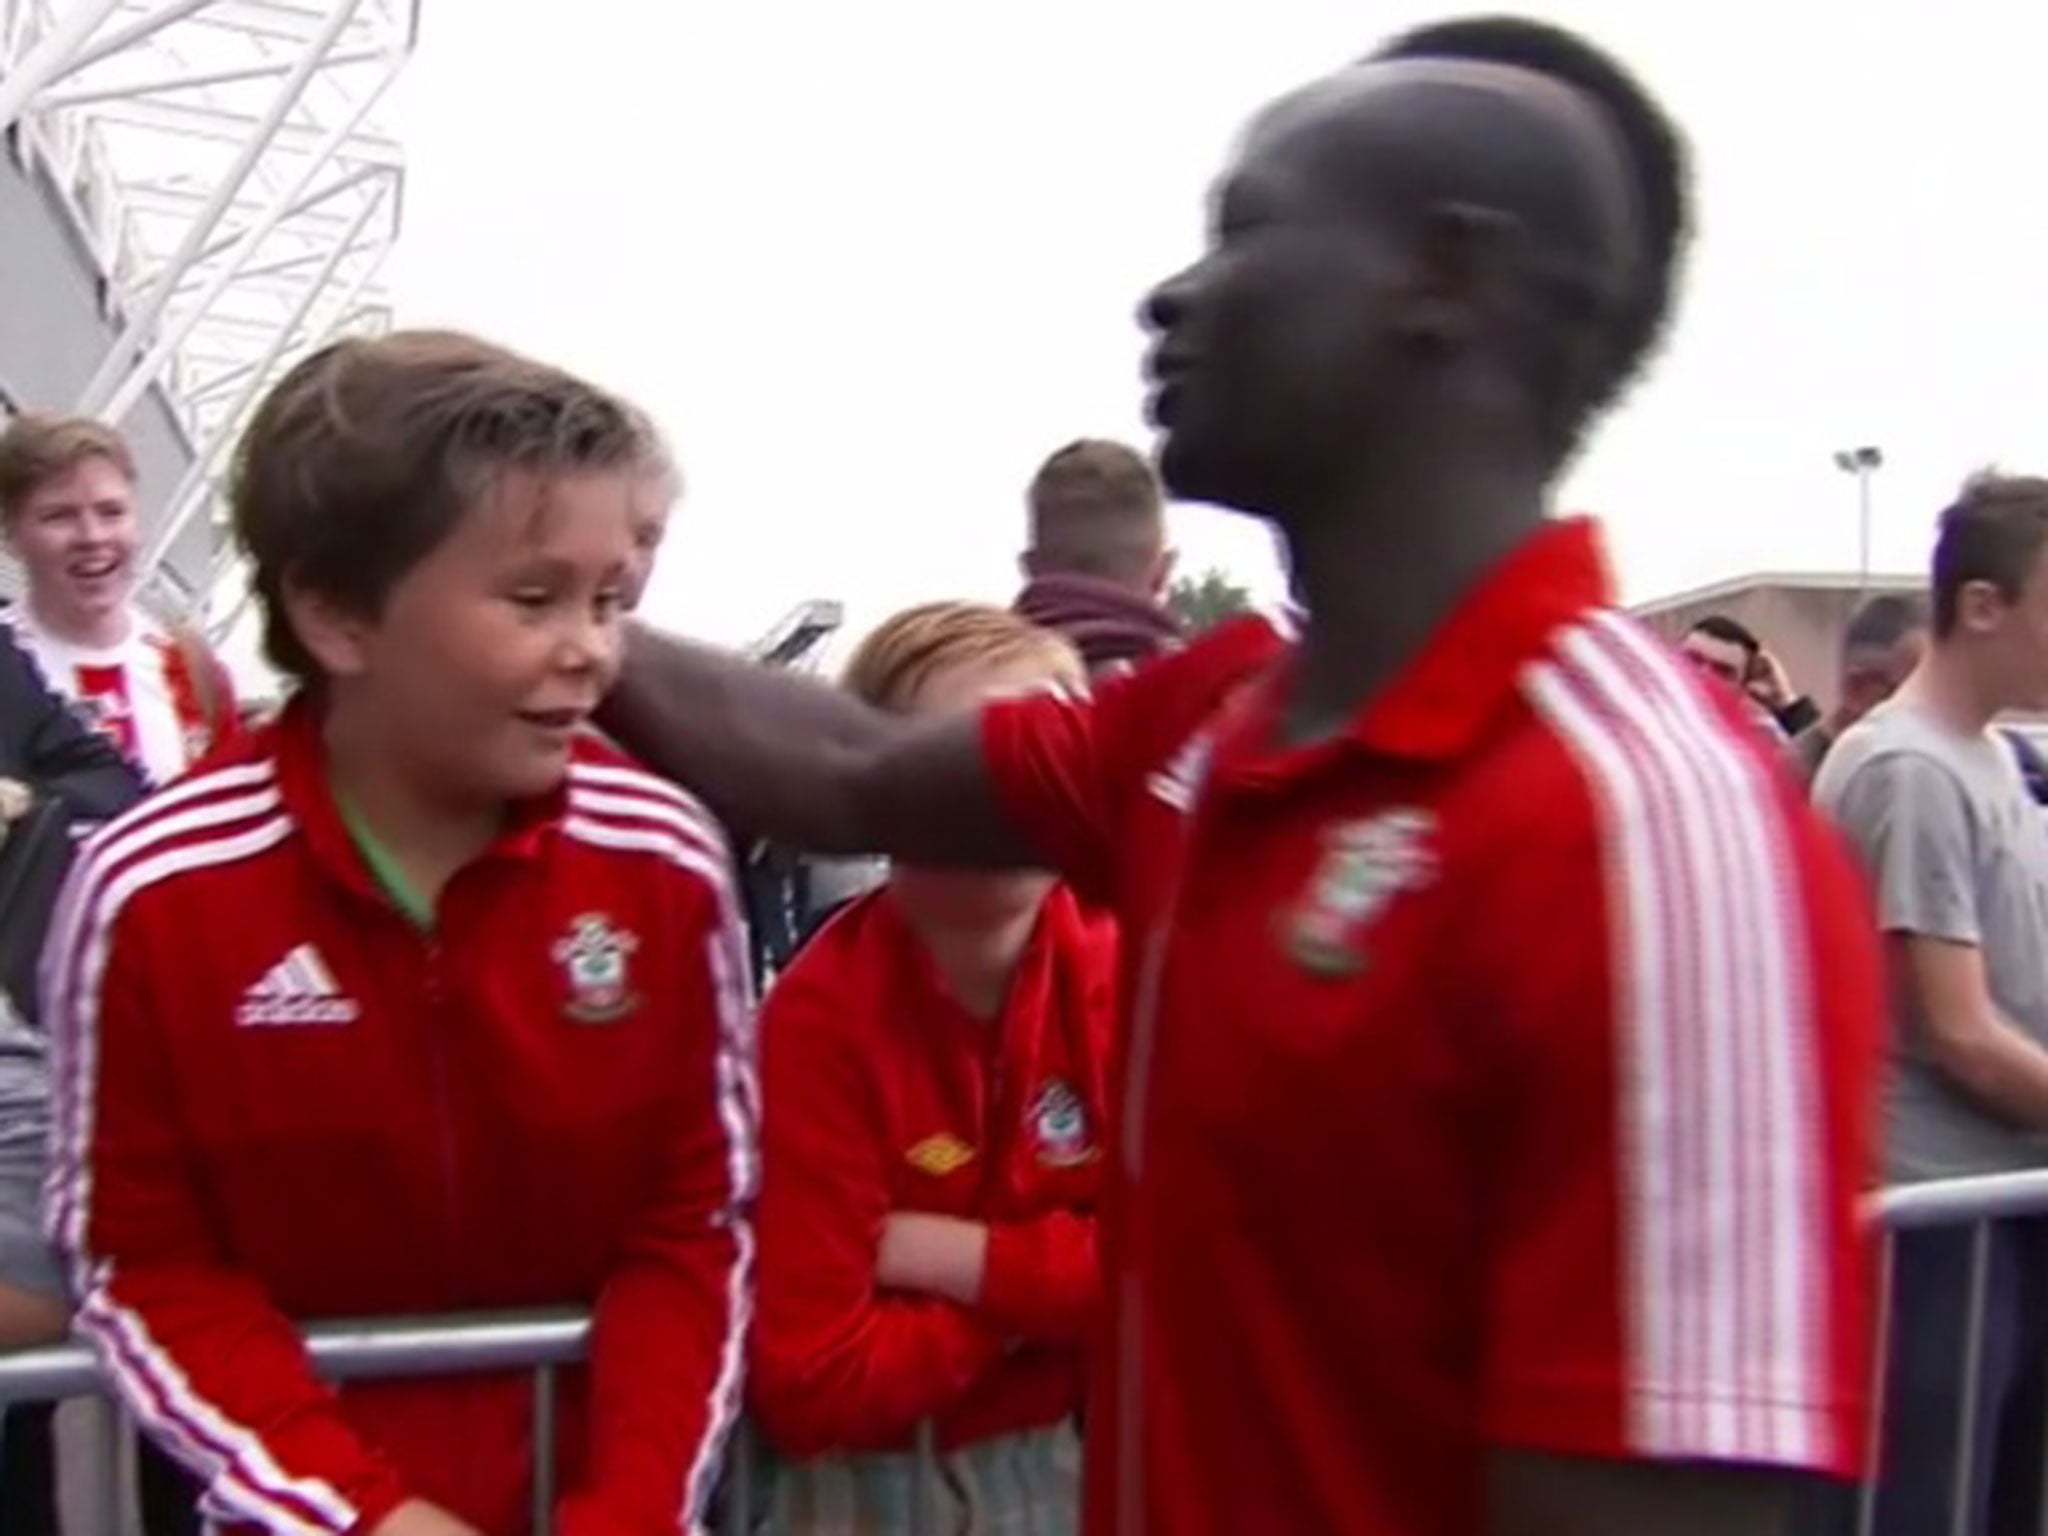 Sadio Mane speaks with the young fan